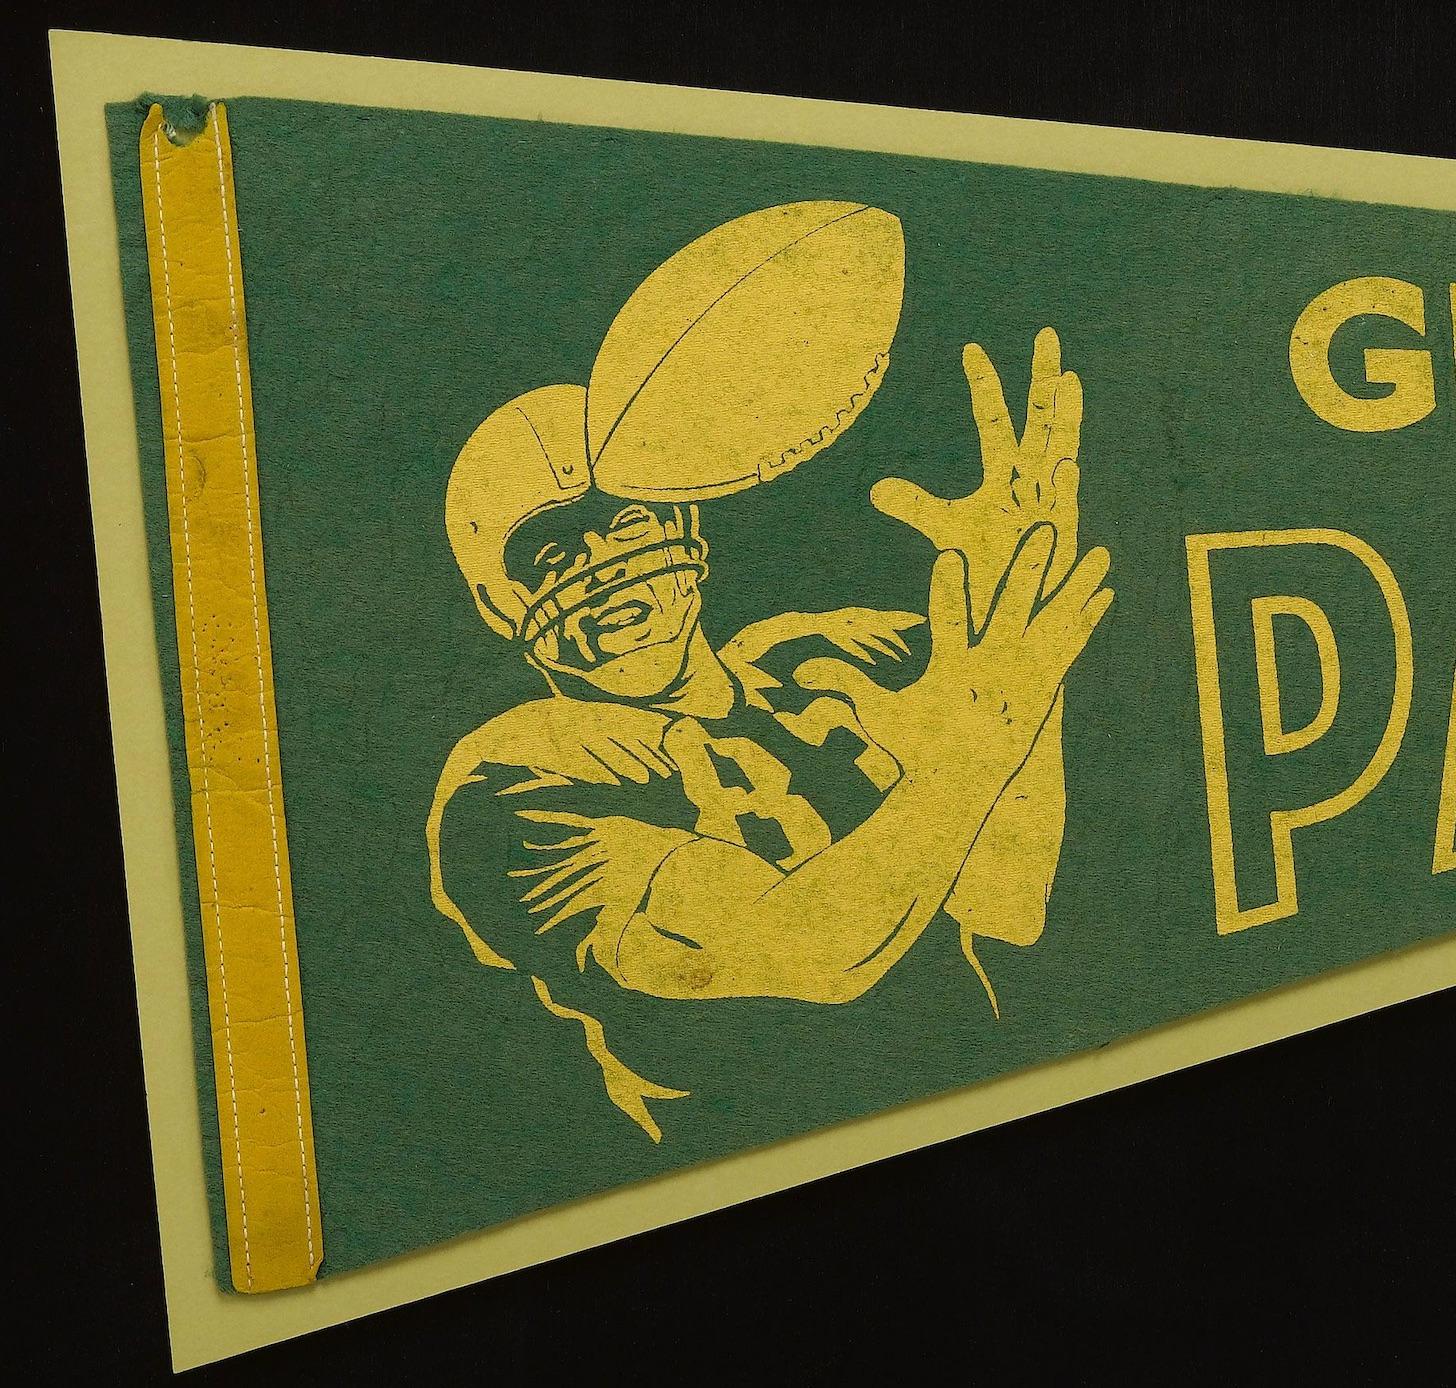 Presented is a vintage green bay packers felt pennant from 1967. The pennant is composed of green felt, with yellow printed lettering, and a yellow felt headband, stitched on in a running stitch. The pennant has yellow block lettering that reads